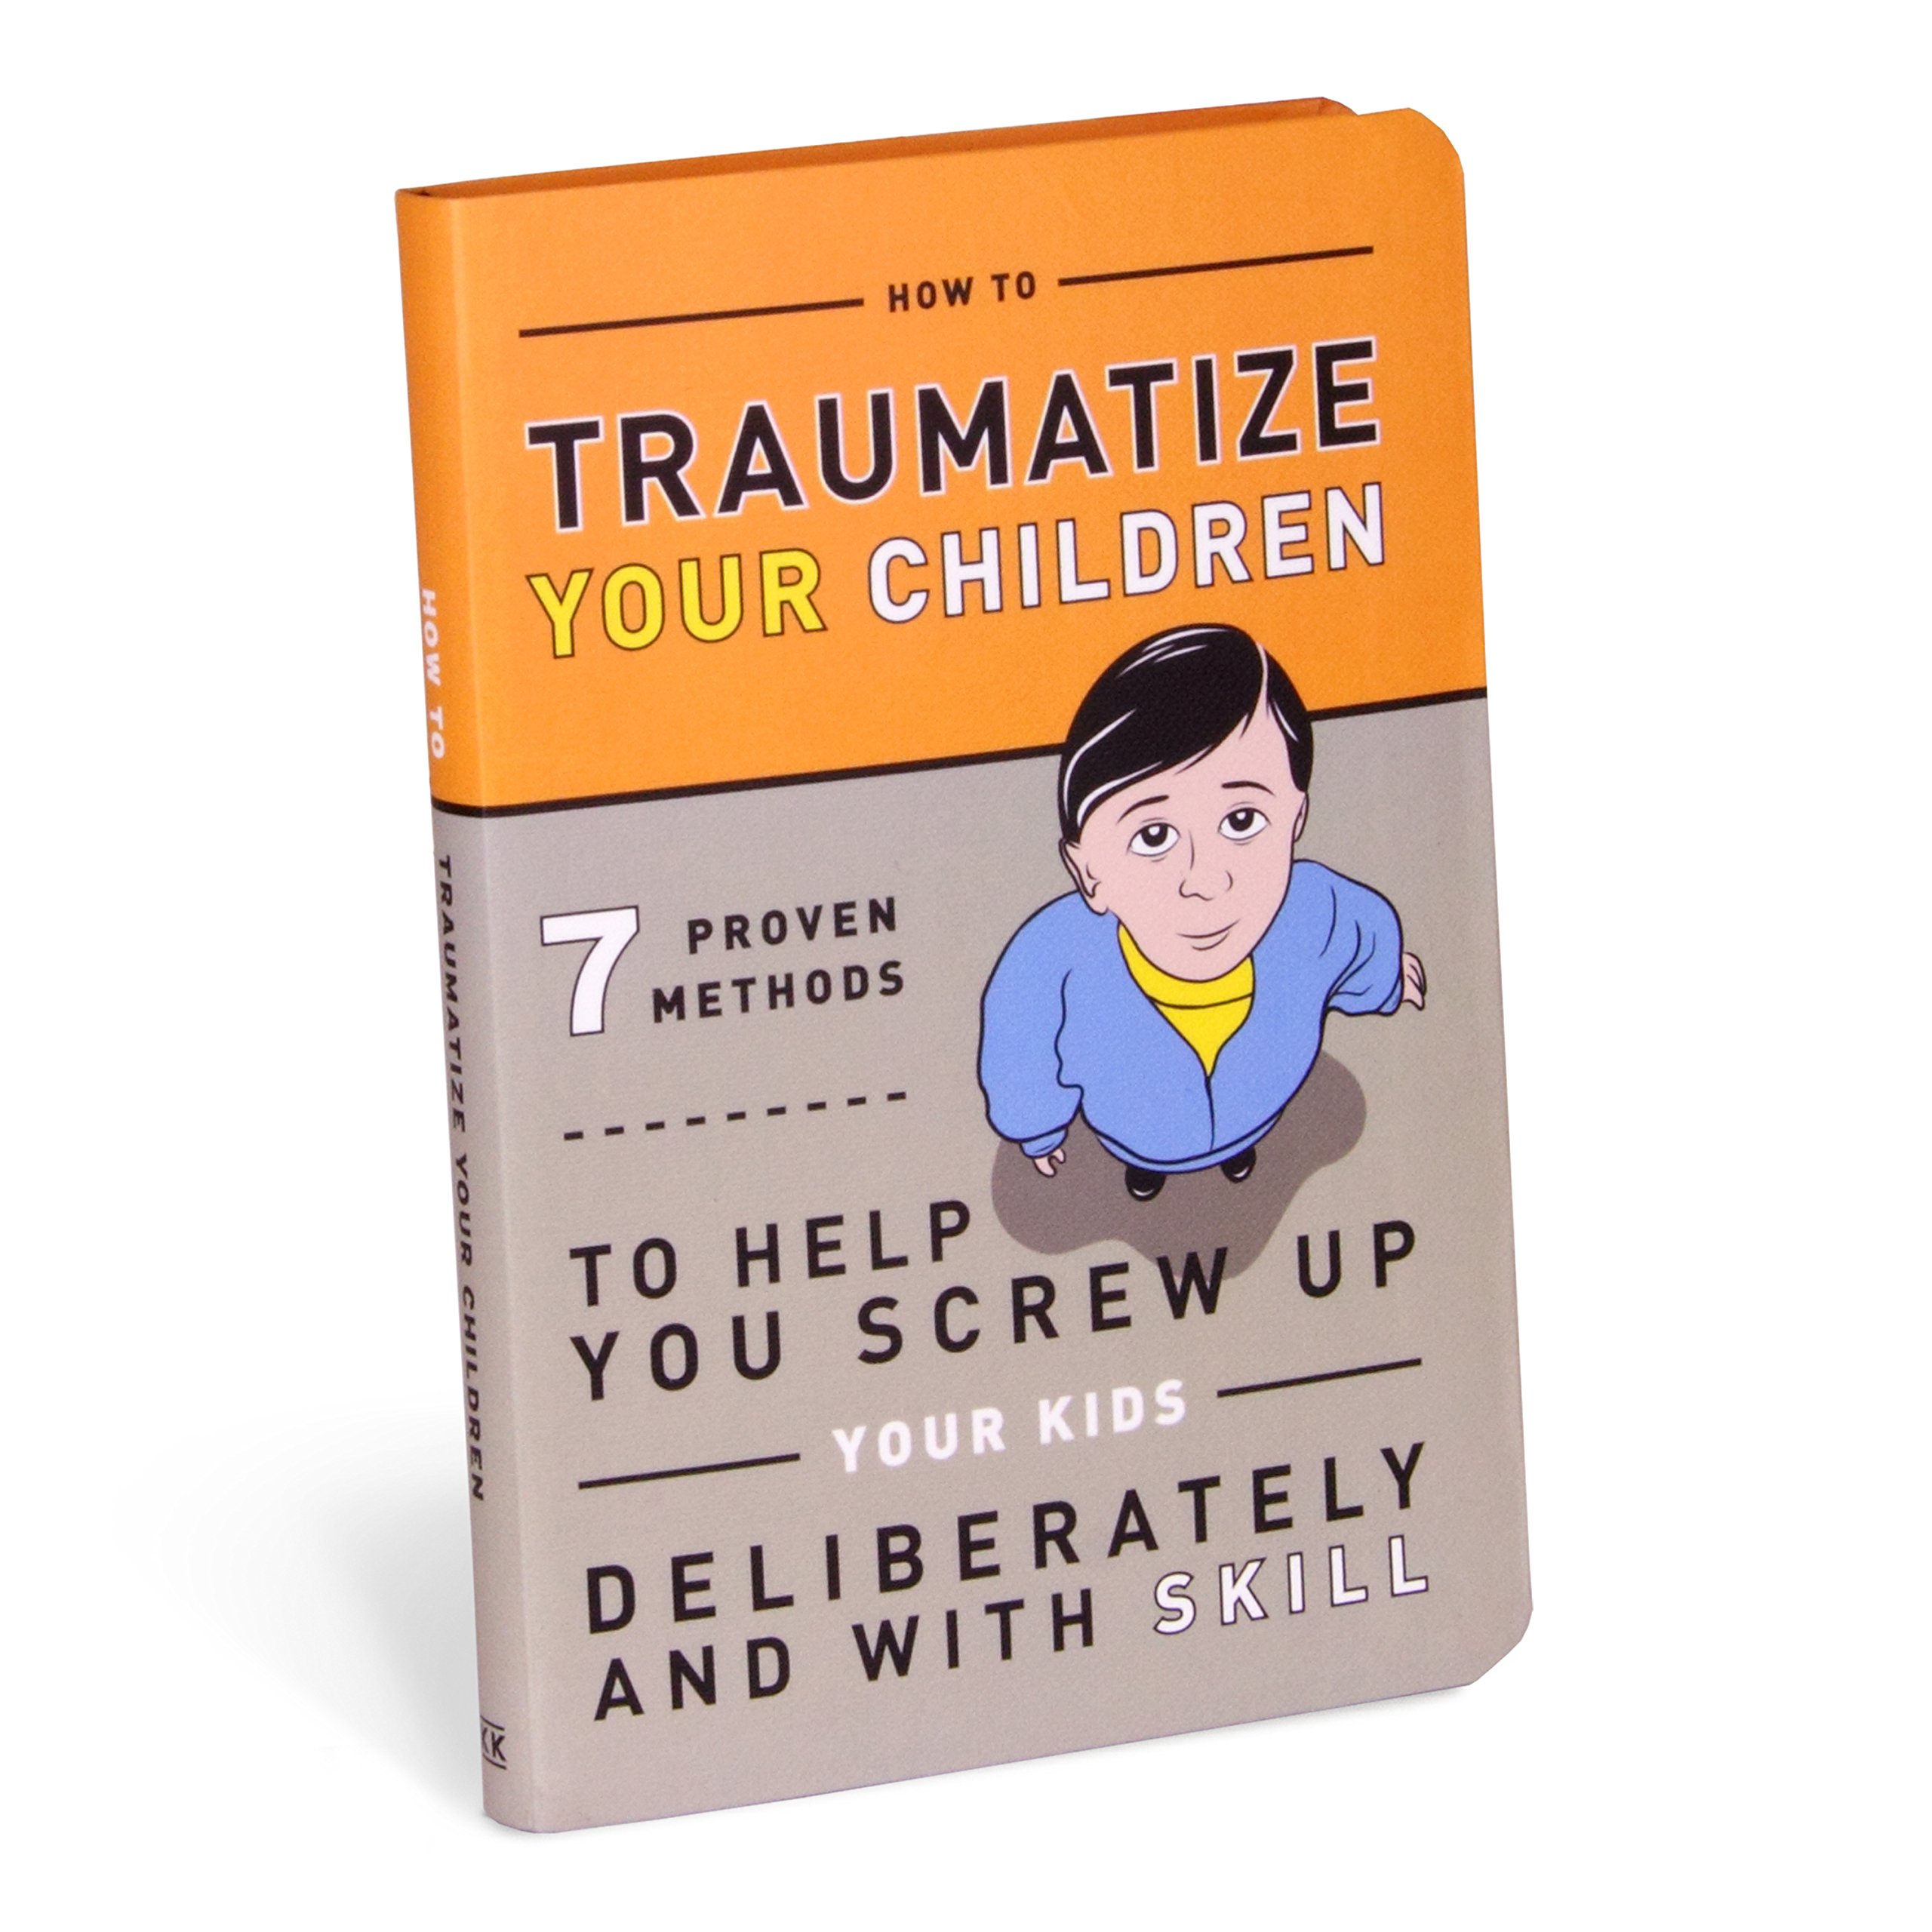 Your kids are going to be screwed up anyway so you might as well do it right! Get it for <a href="https://amzn.to/2BteHEG">$11.48</a>.